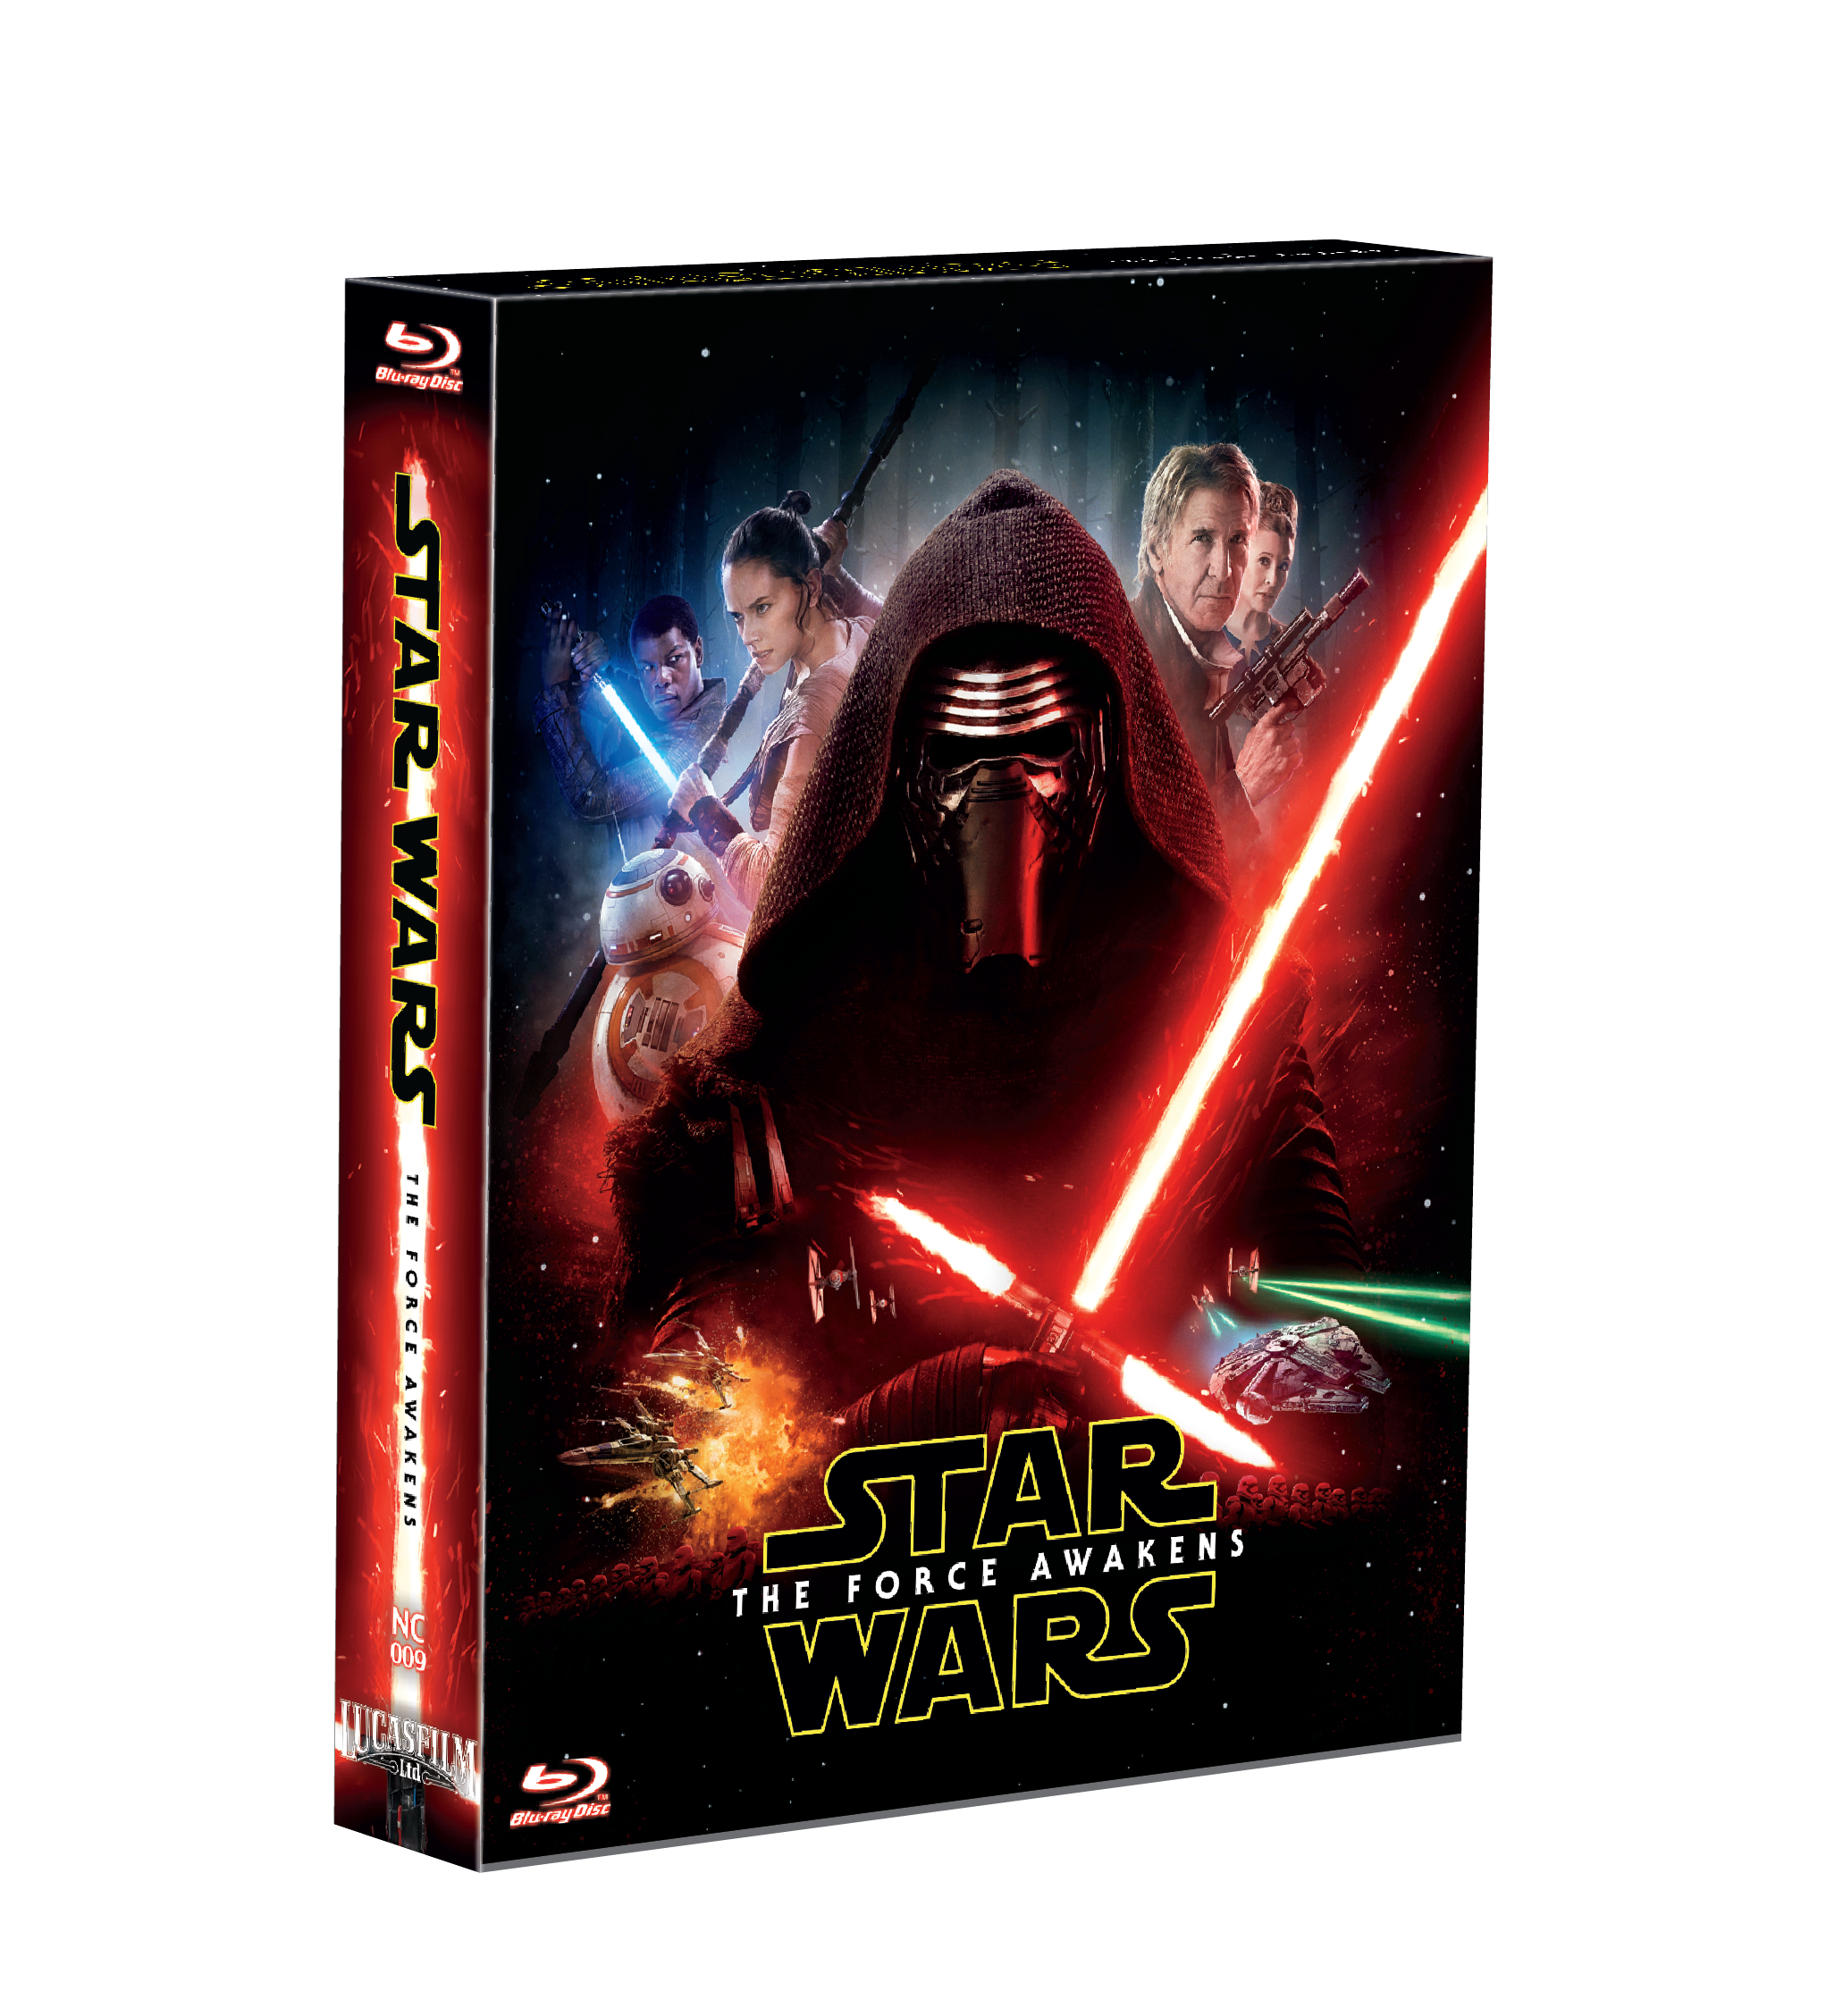 STAR WARS: EPISODE VII - THE FORCE AWAKENS STEELBOOK FULL SLIP-A(LIMITED 200 COPIES) NC#9